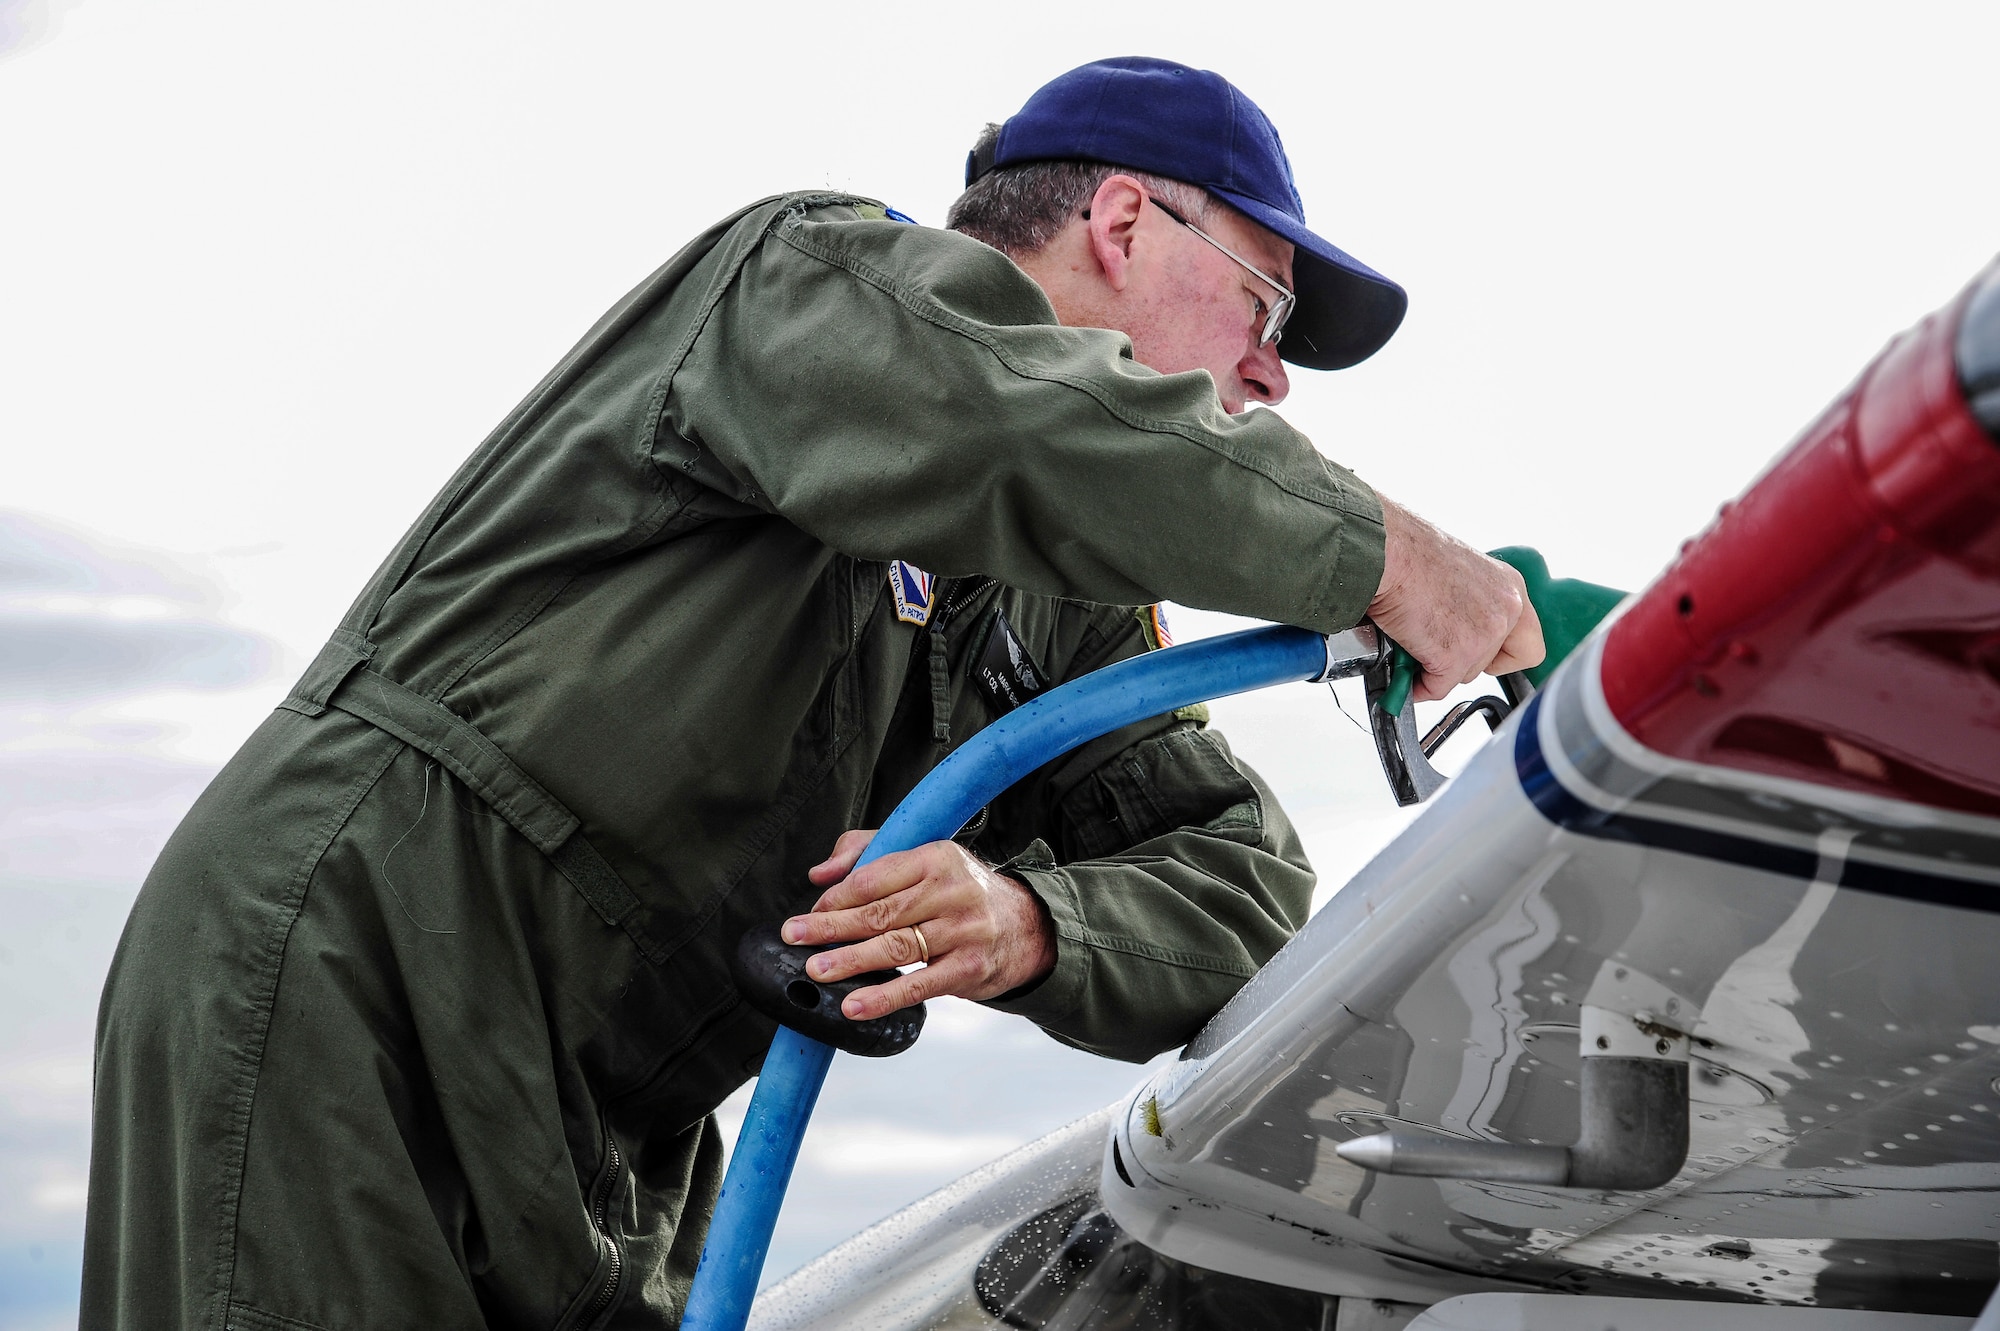 Mark Biron, Civil Air Patrol 71st Composite Squadron member, refuels a CAP Cessna 172 after a RED FLAG-Alaska 13-3 sortie Aug. 19, 2013, Eielson Air Force Base, Alaska. The 71st CS flew multiple sorties during RF-A 13-3, simulating low-flying threats and “attacking” various locations throughout the Joint Pacific Alaska Range Complex. (U.S. Air Force photo by Senior Airman Zachary Perras)